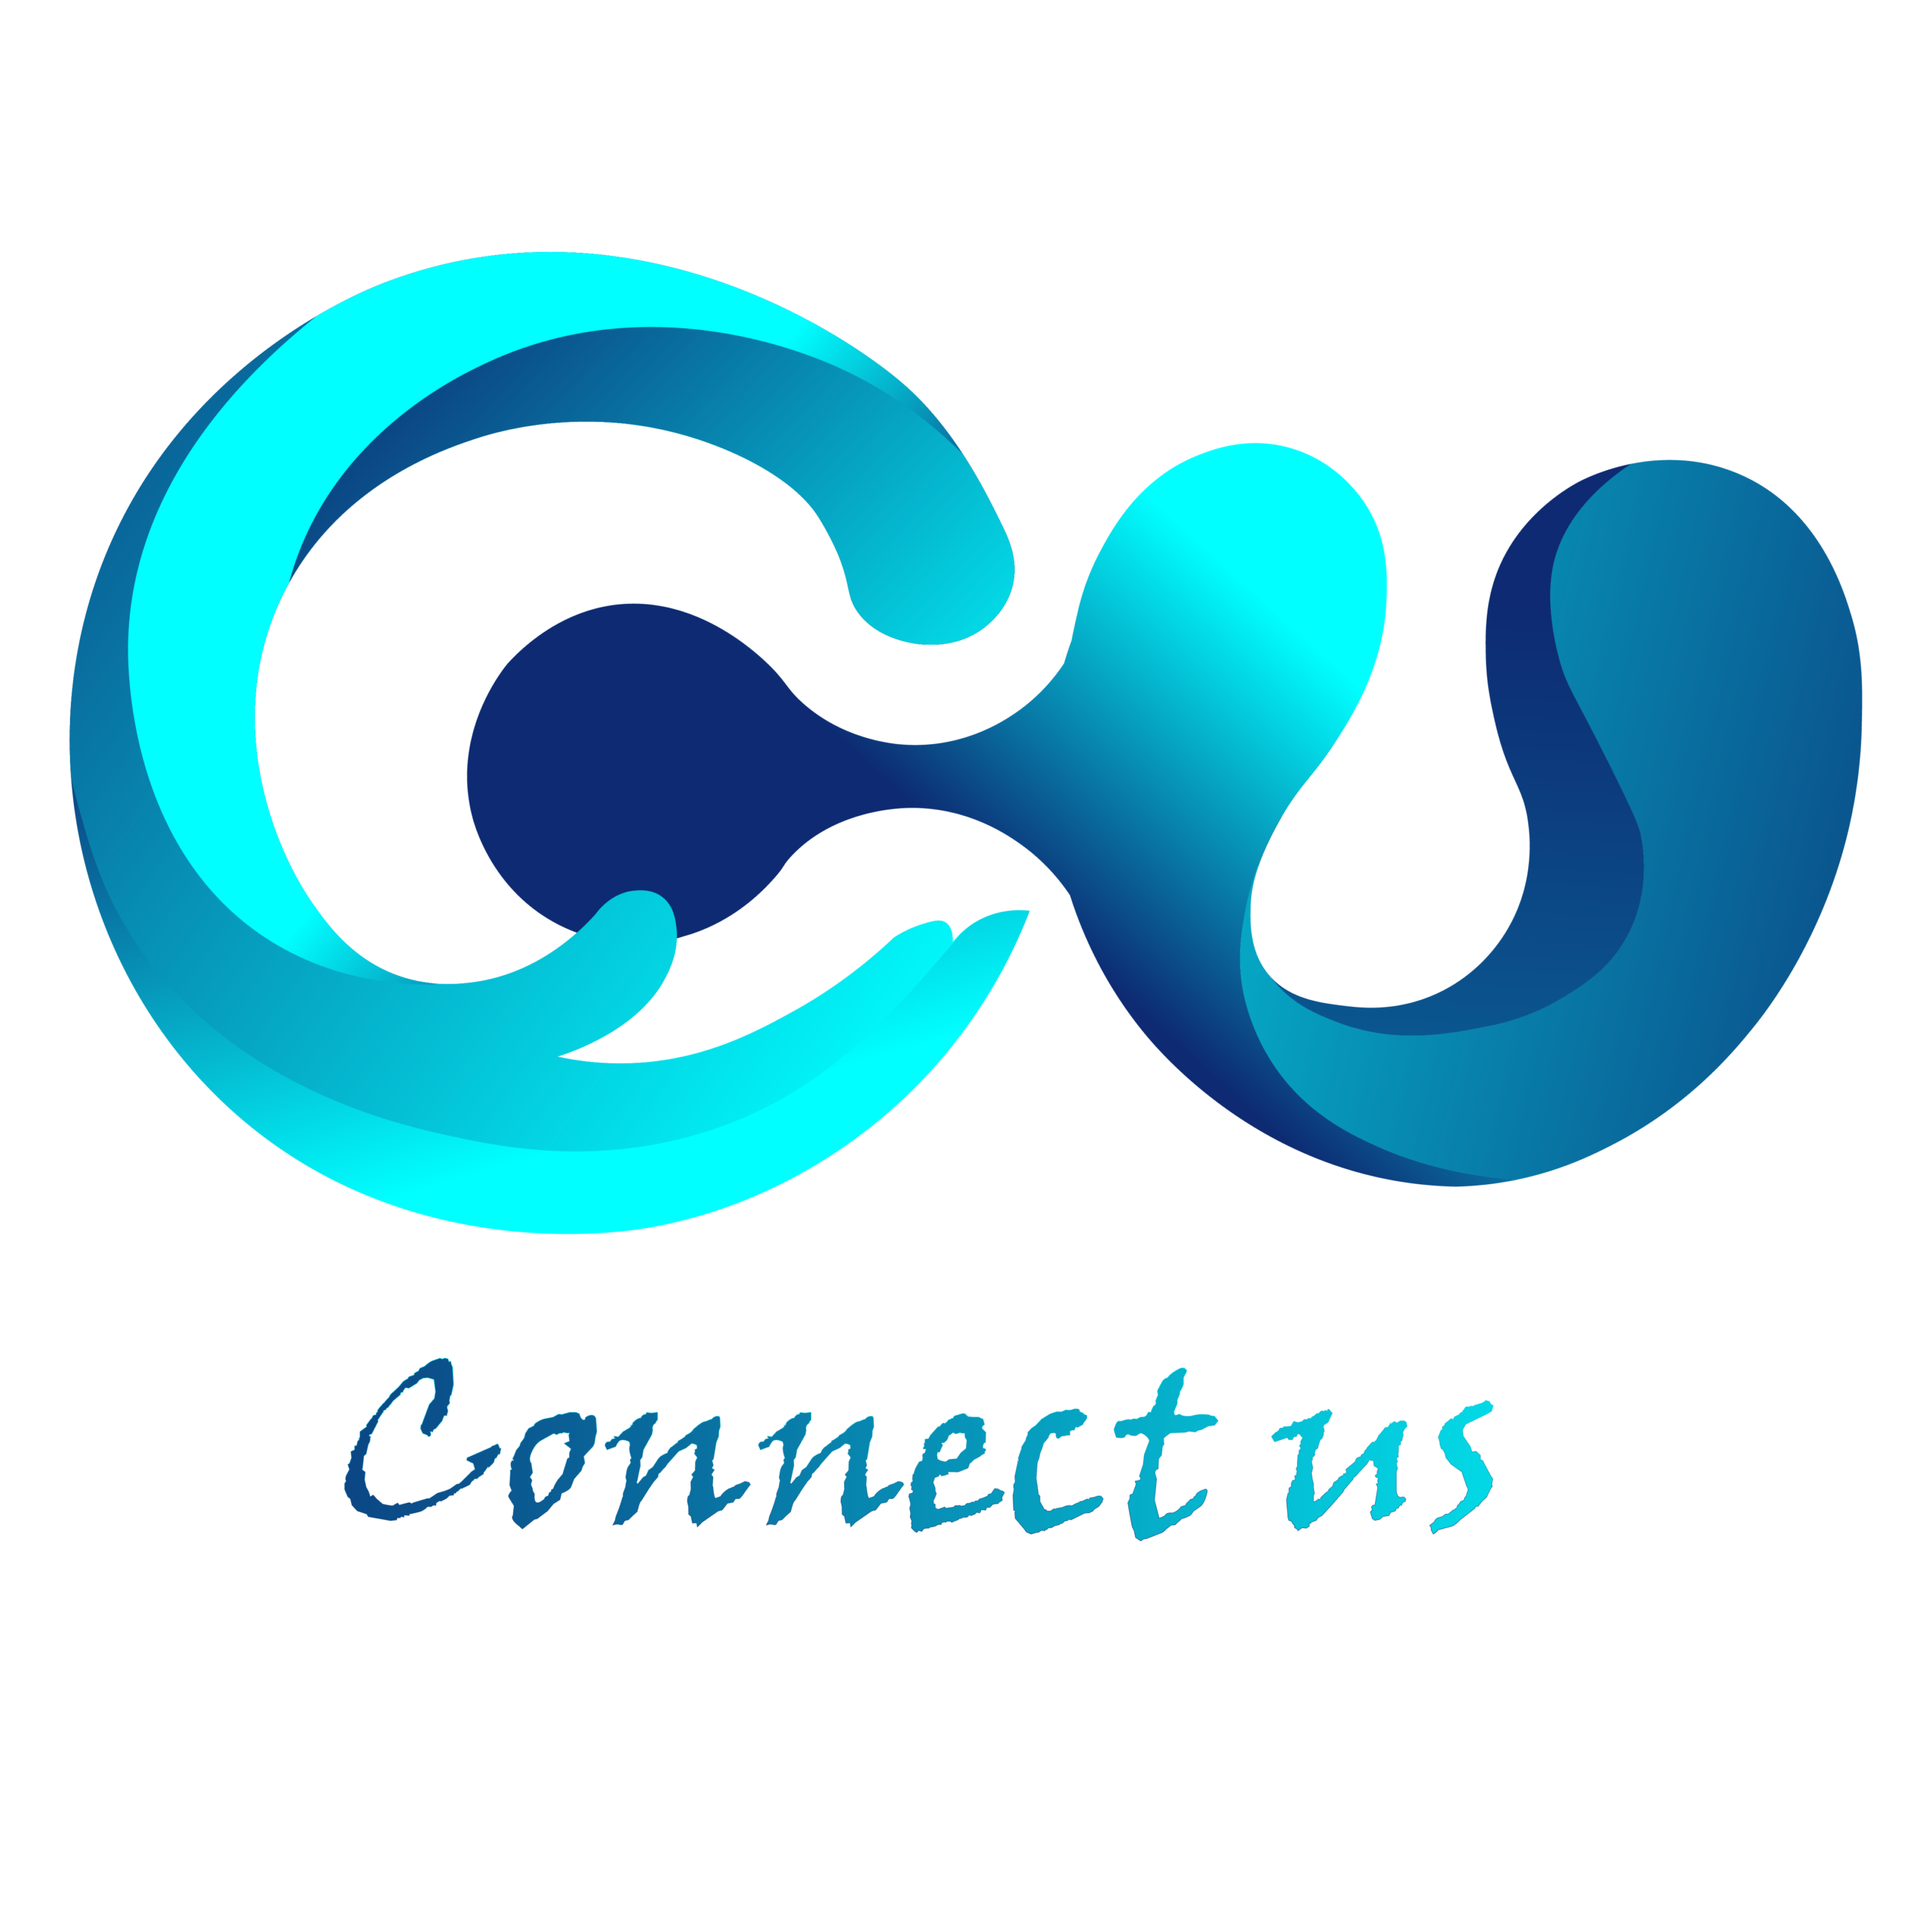 Connect Us